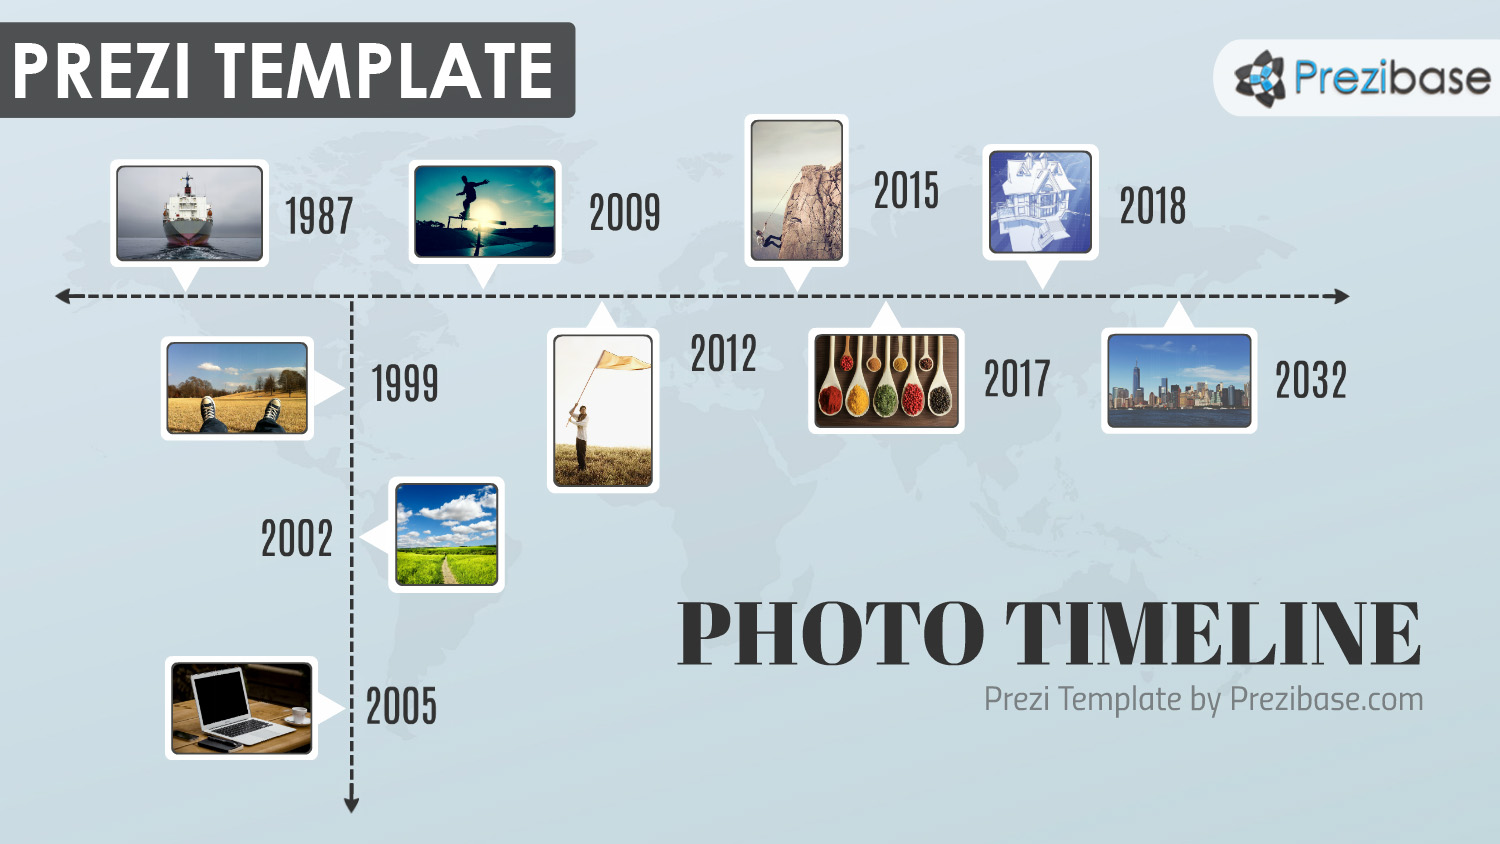 photo gallery timeline history business images slideshow prezi template